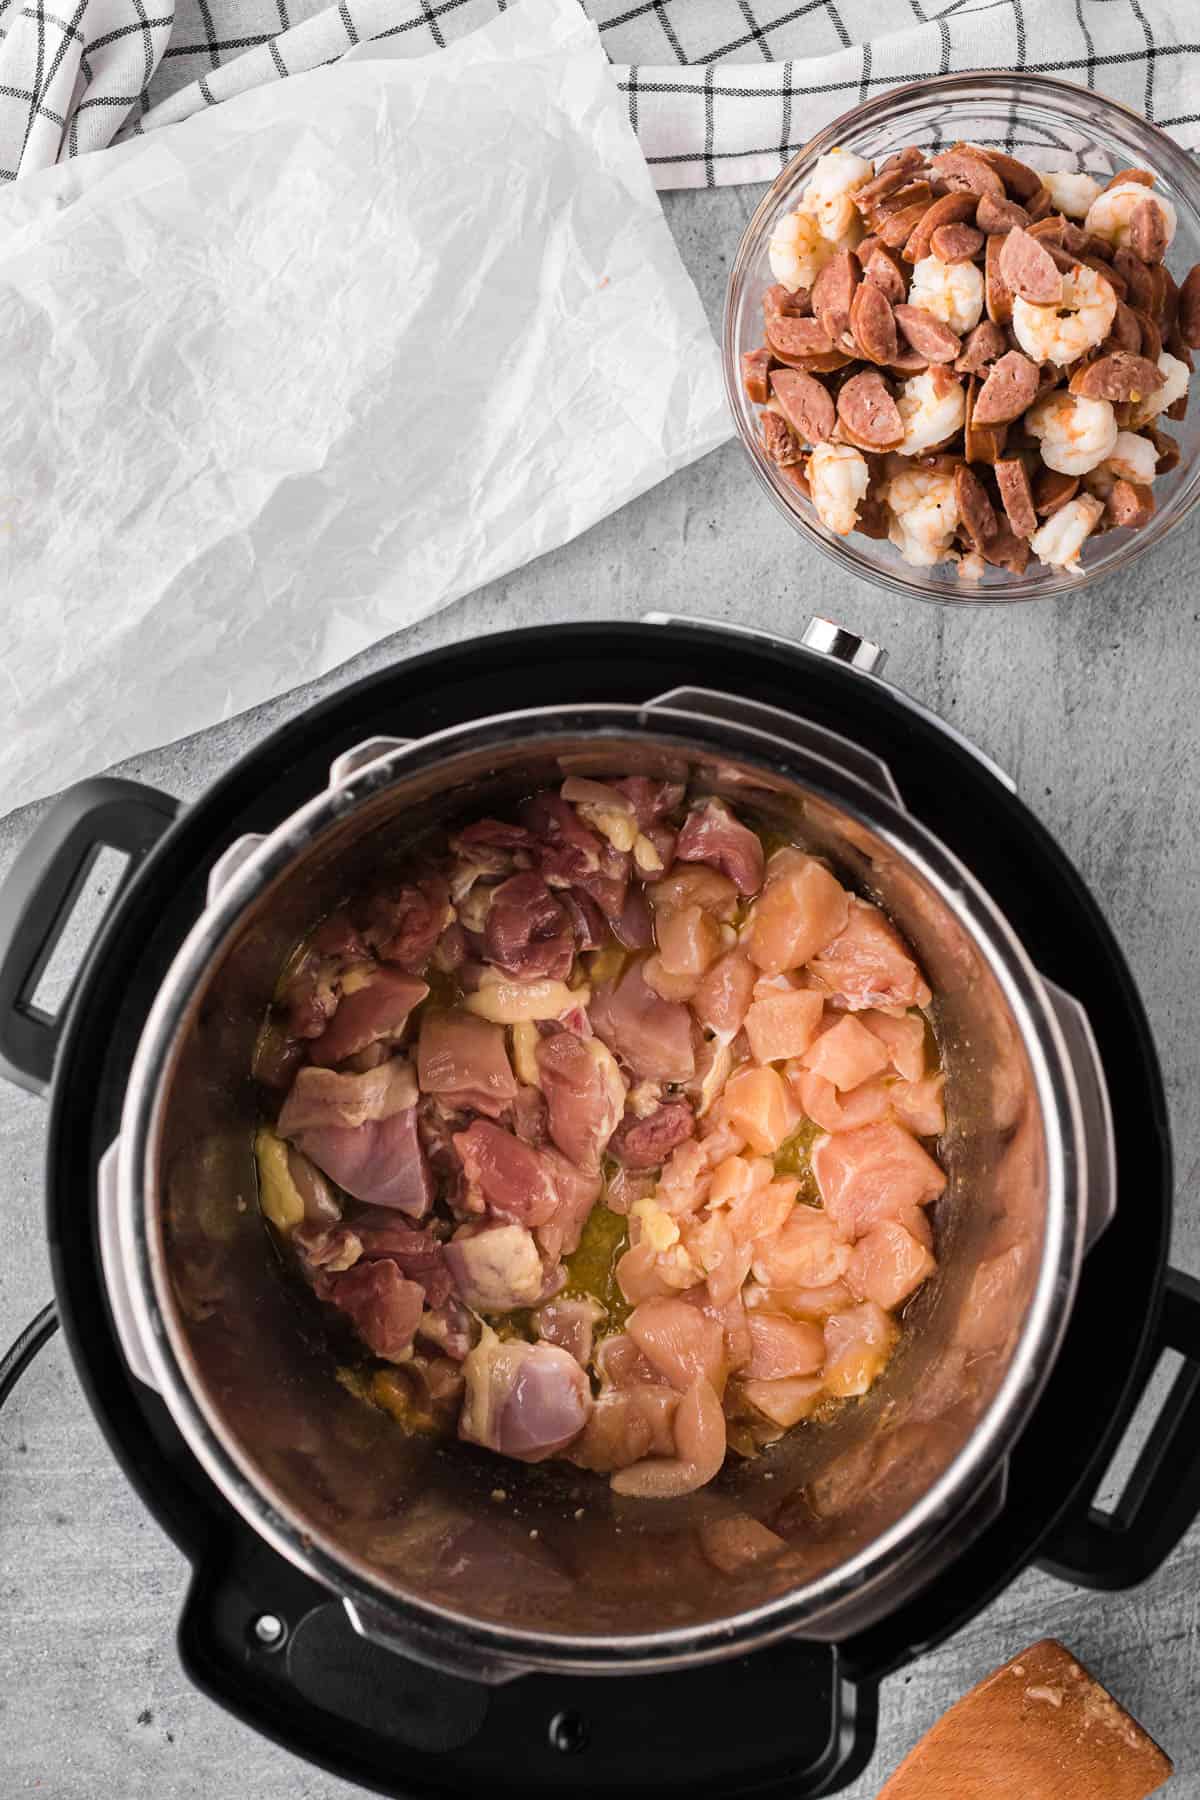 Cooking chicken thighs and breast in Instant Pot for jambalaya recipe.